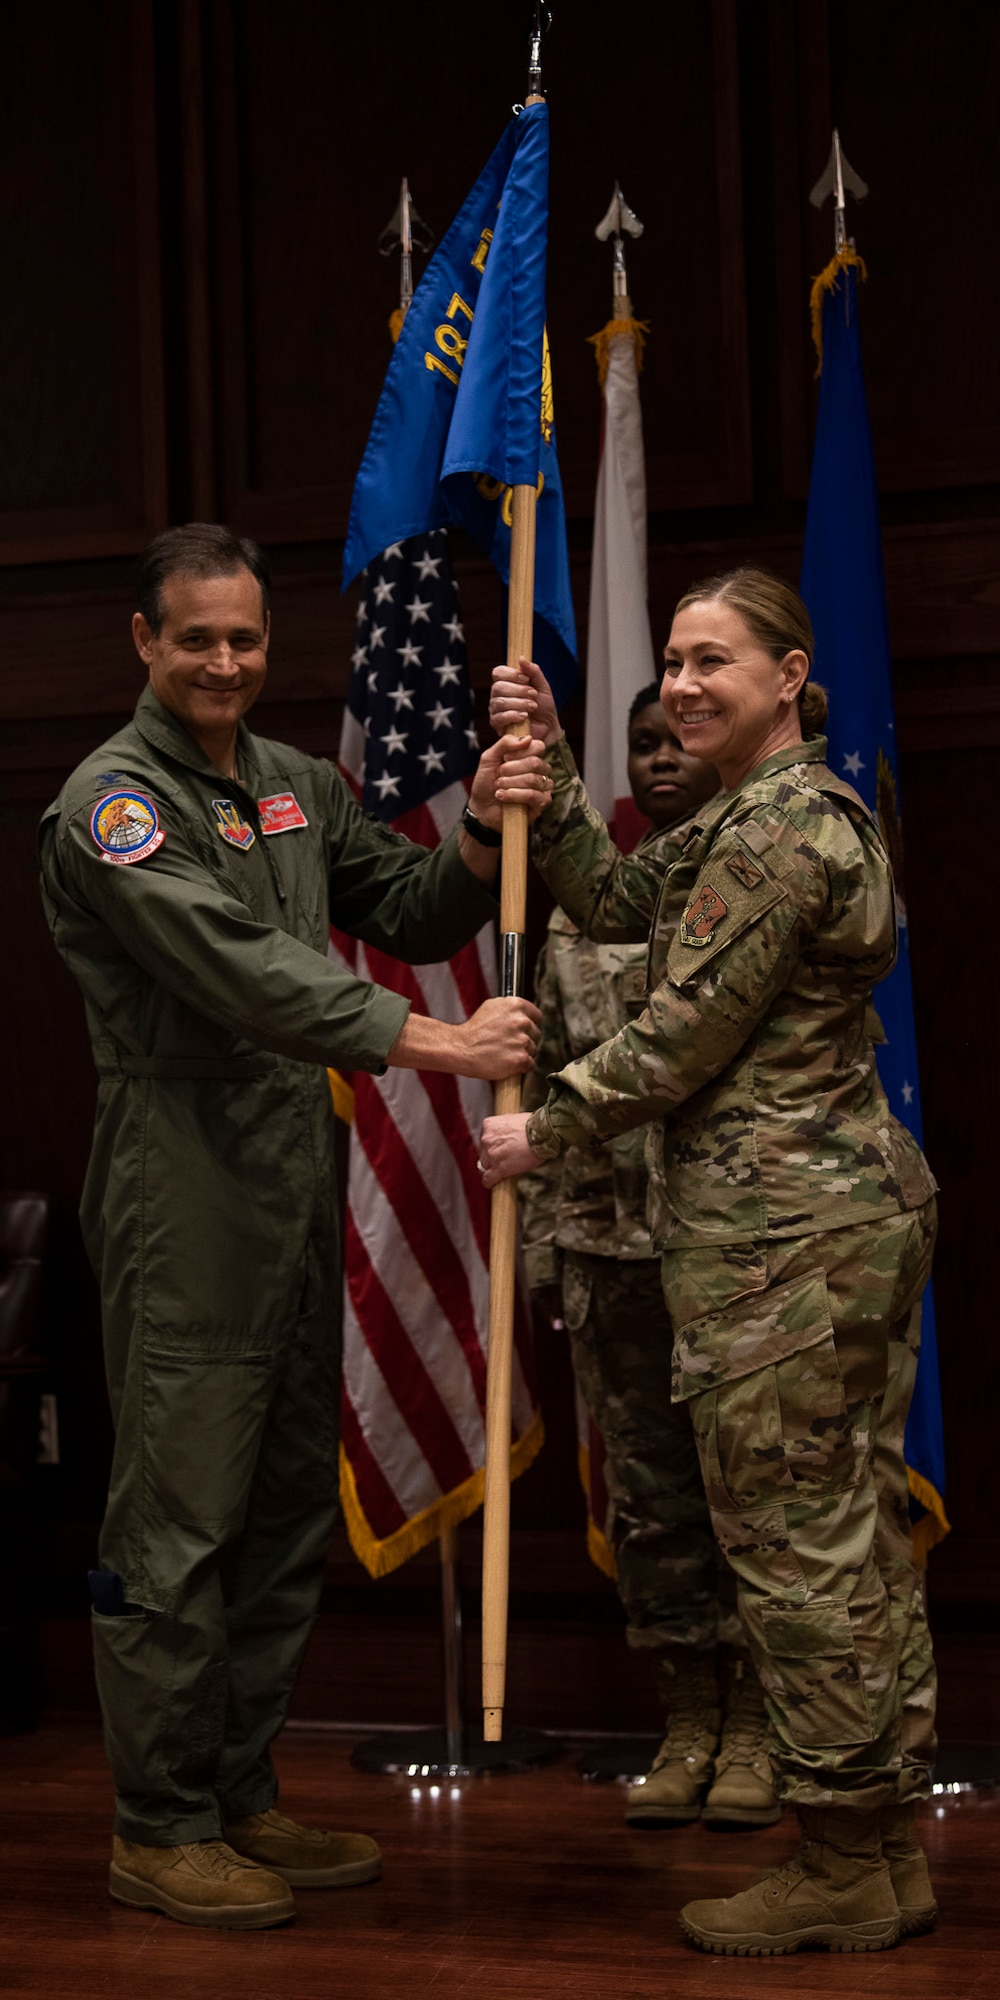 Lt. Col. Amy Z. Mundell assumes command of the 187th Medical Group as part of a change of command ceremony where Col. Tara D. McKennie relinquished command.